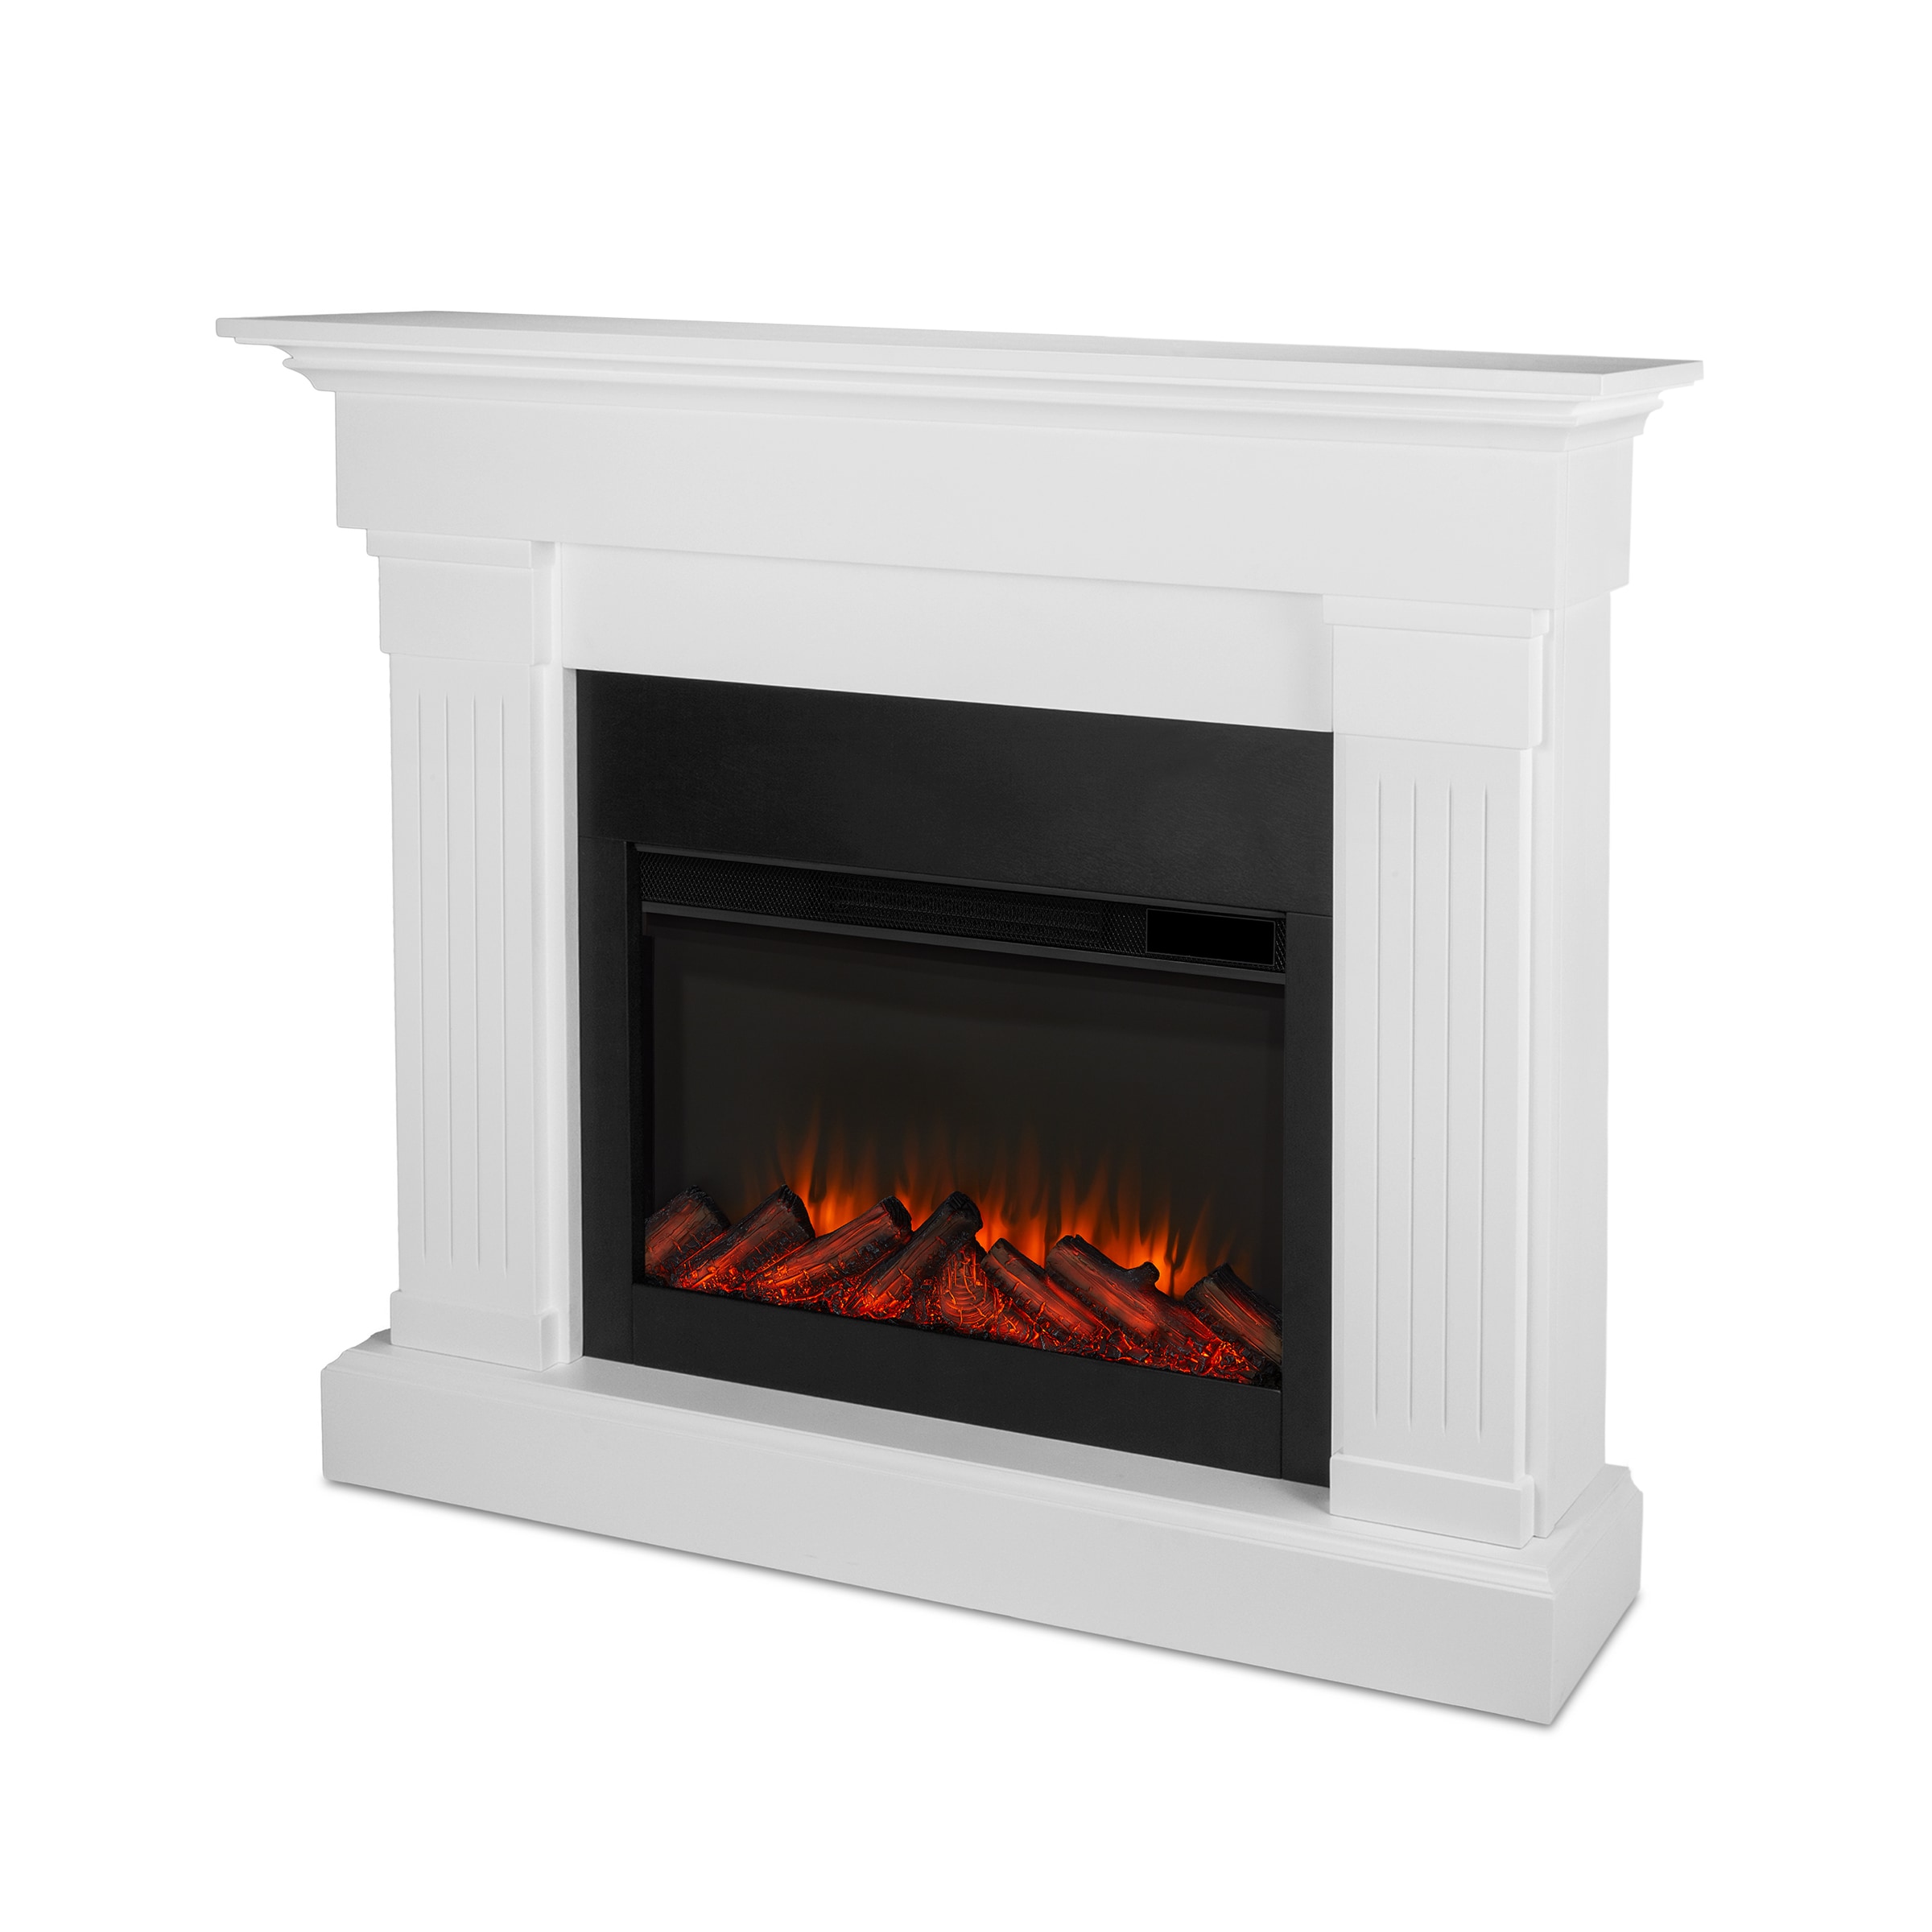 White Fan Forced Electric Fireplace, Electric Fireplace Heater Realistic Flame And Logs With Glowing Embers